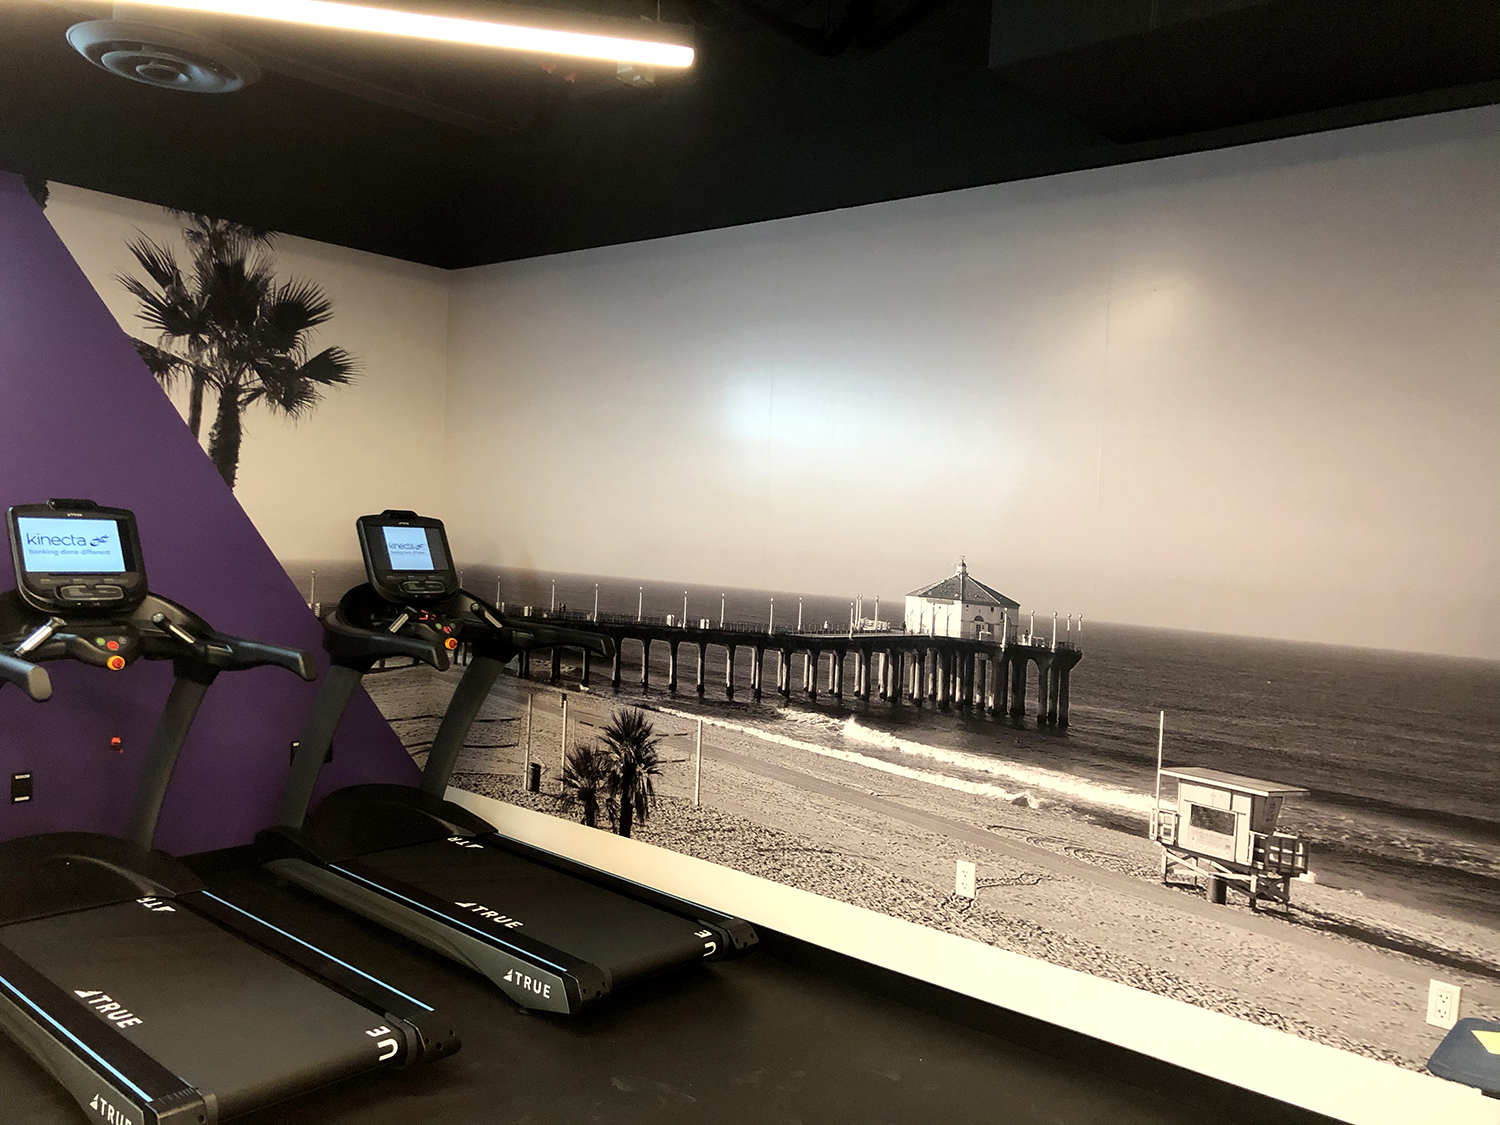 Wall mural in gym of pier stretching out into the ocean